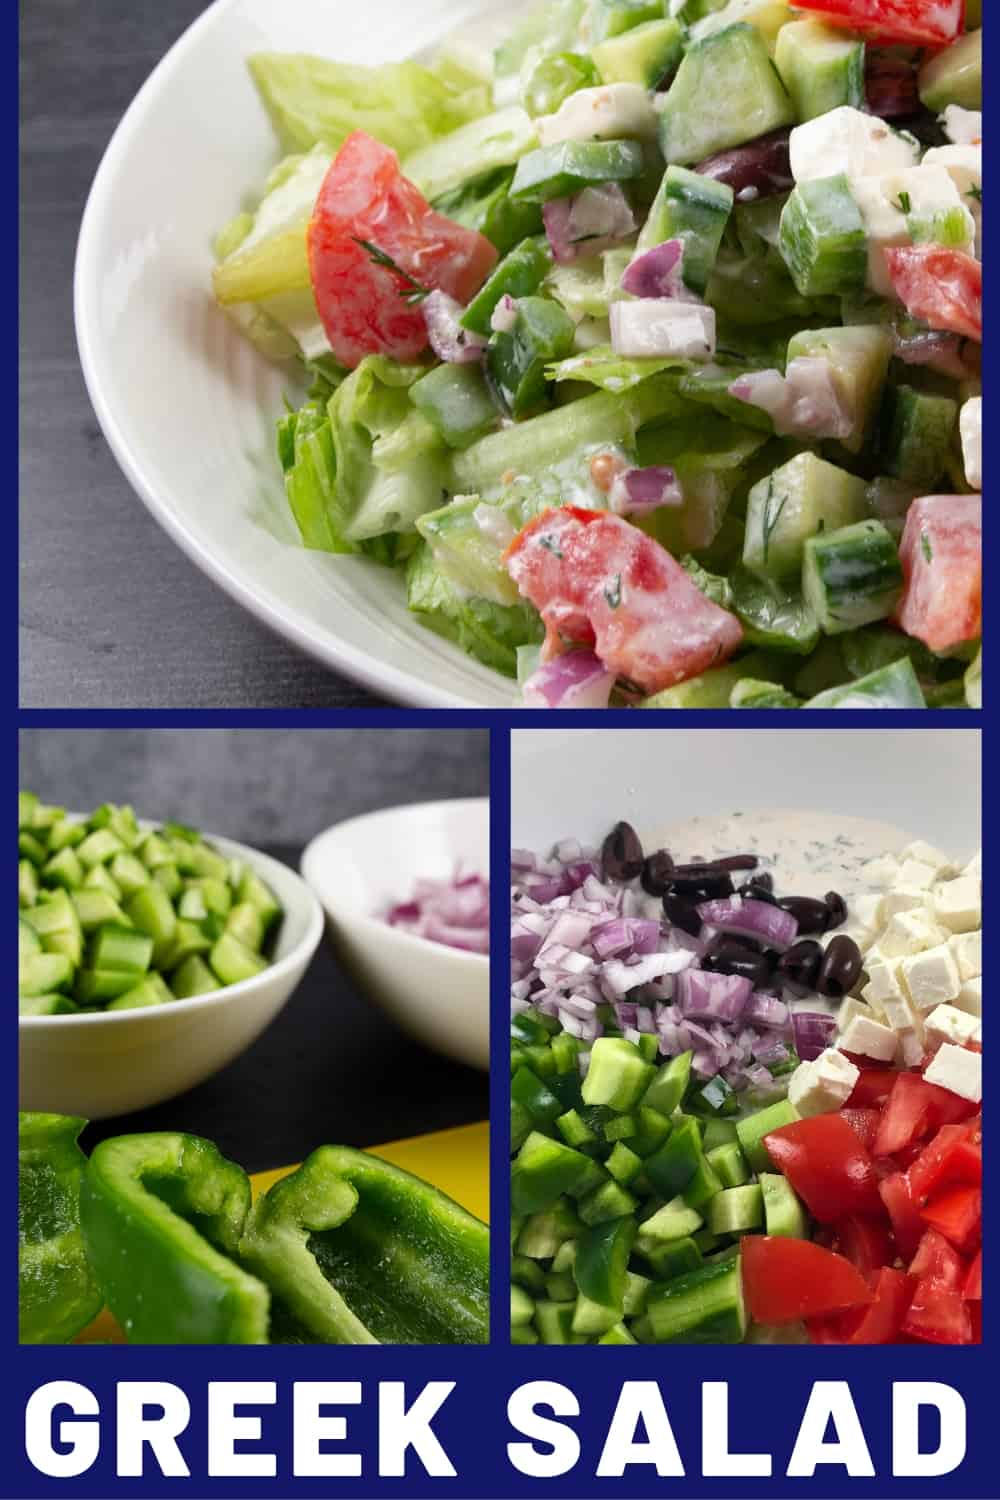 This Greek salad is a healthy week night alternative to take out when you need to get dinner on the table fast! #salad #recipe #healthy #cucumber #traditional #chopped #classic #authentic ♡ cheerfulcook.com via @cheerfulcook